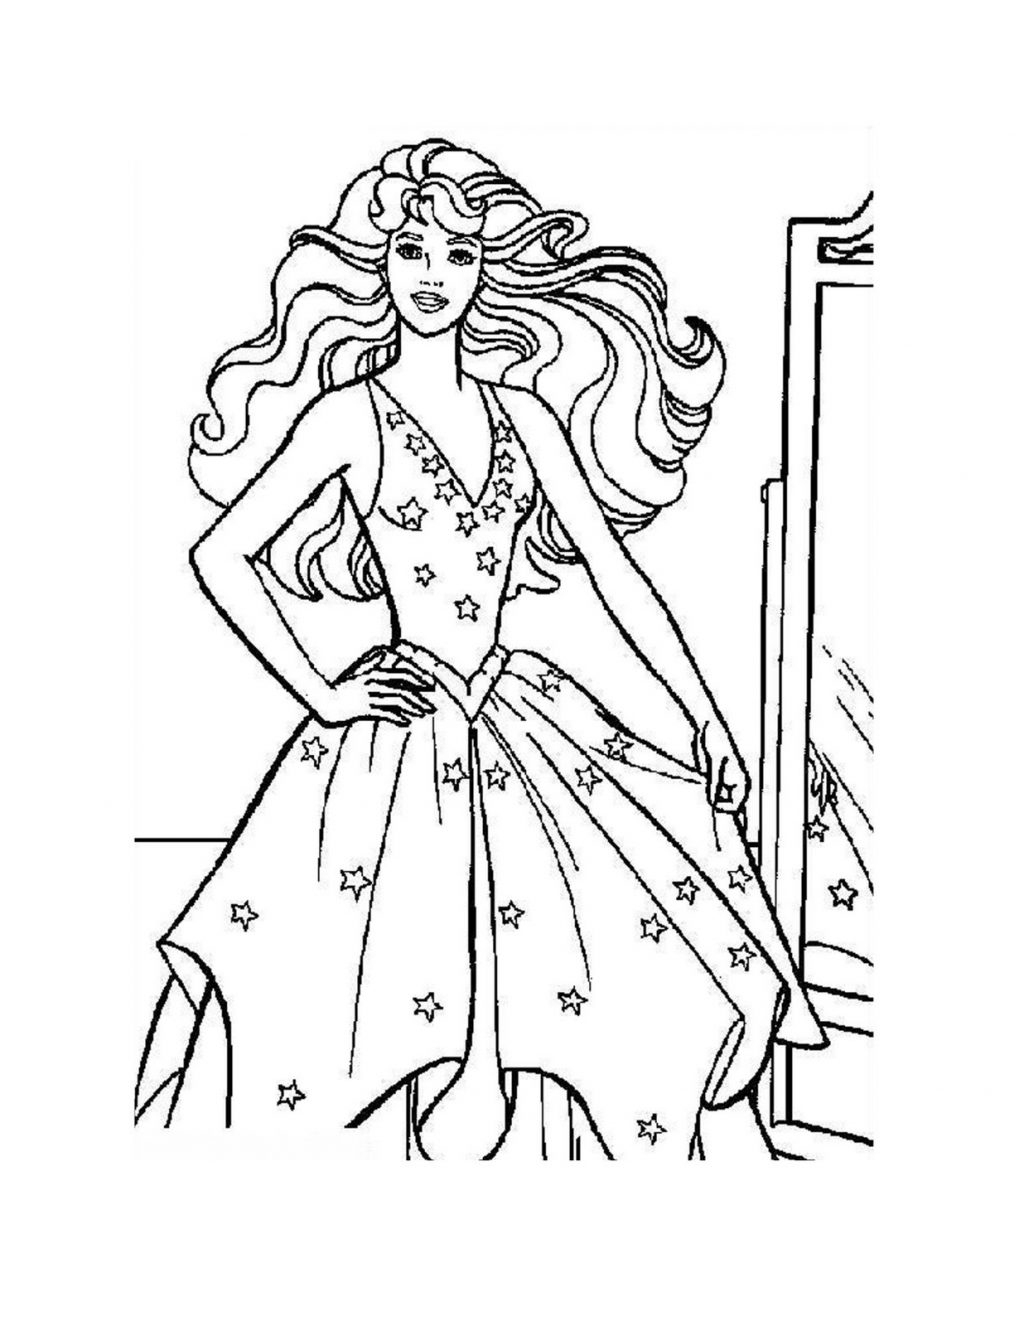 Coloring Pages ~ Disney Princess Free Coloring Pagesable Elsa Merida - Free Printable Princess Coloring Pages